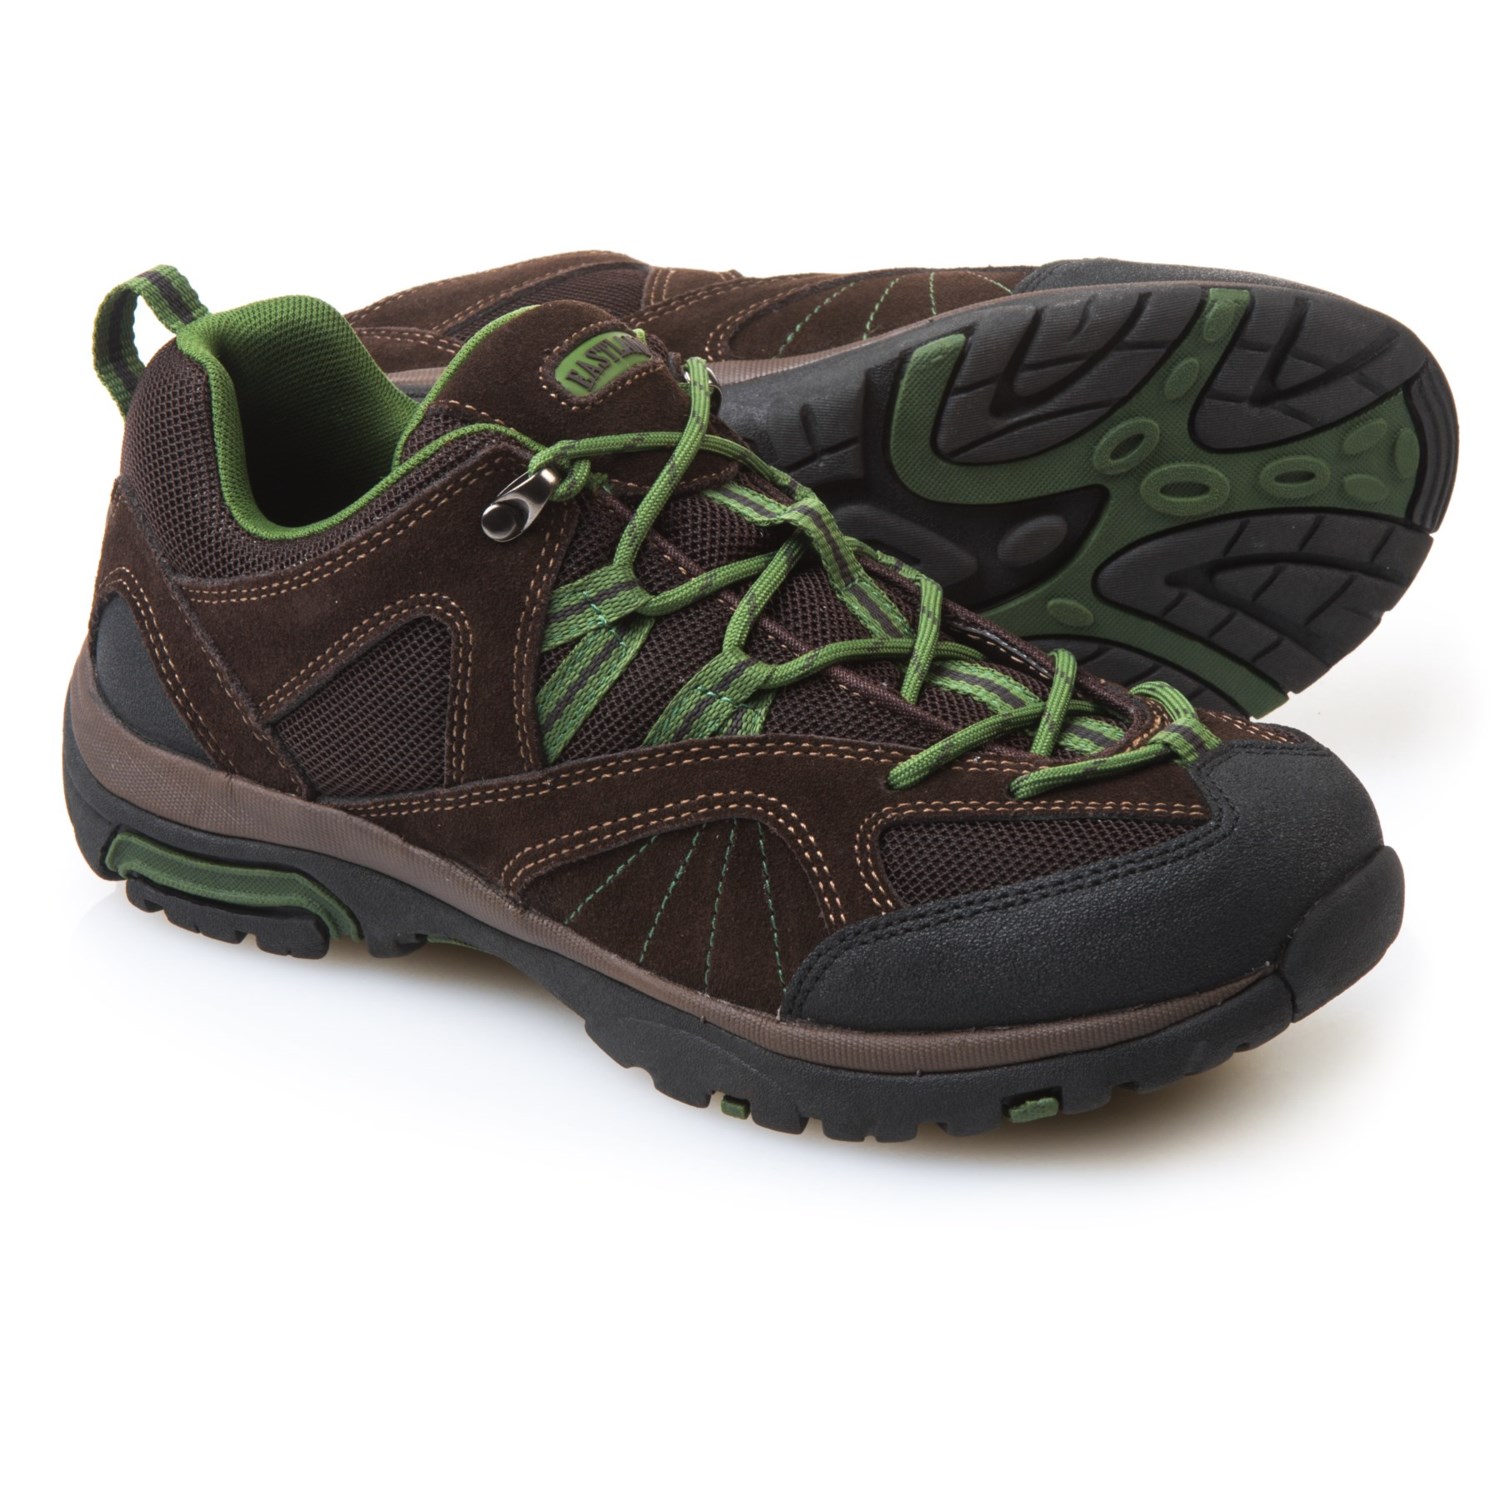 Eastland Olympus Hiking Shoes (For Men) - Save 47%